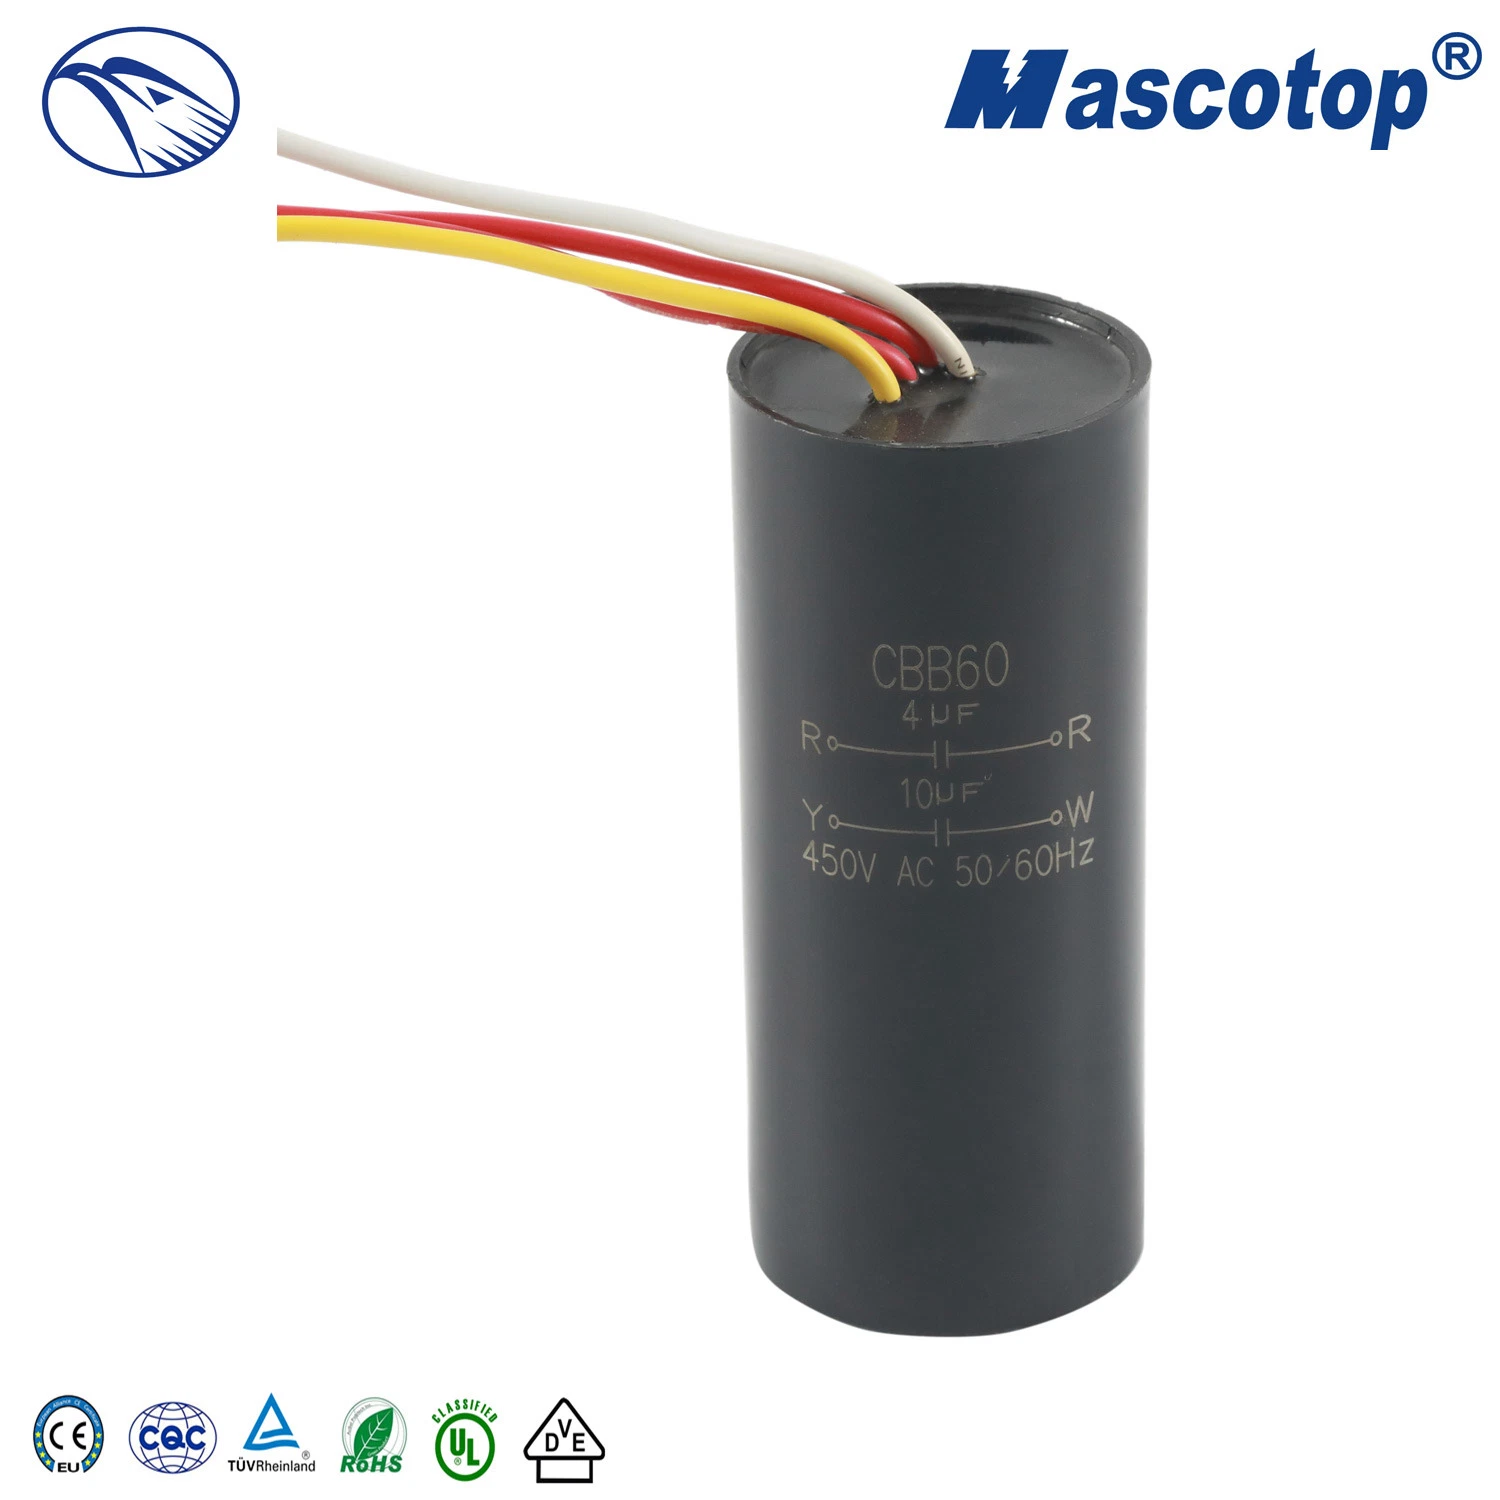 Low Power Consuming Cbb60 Capacitor with Steady Electric Performance